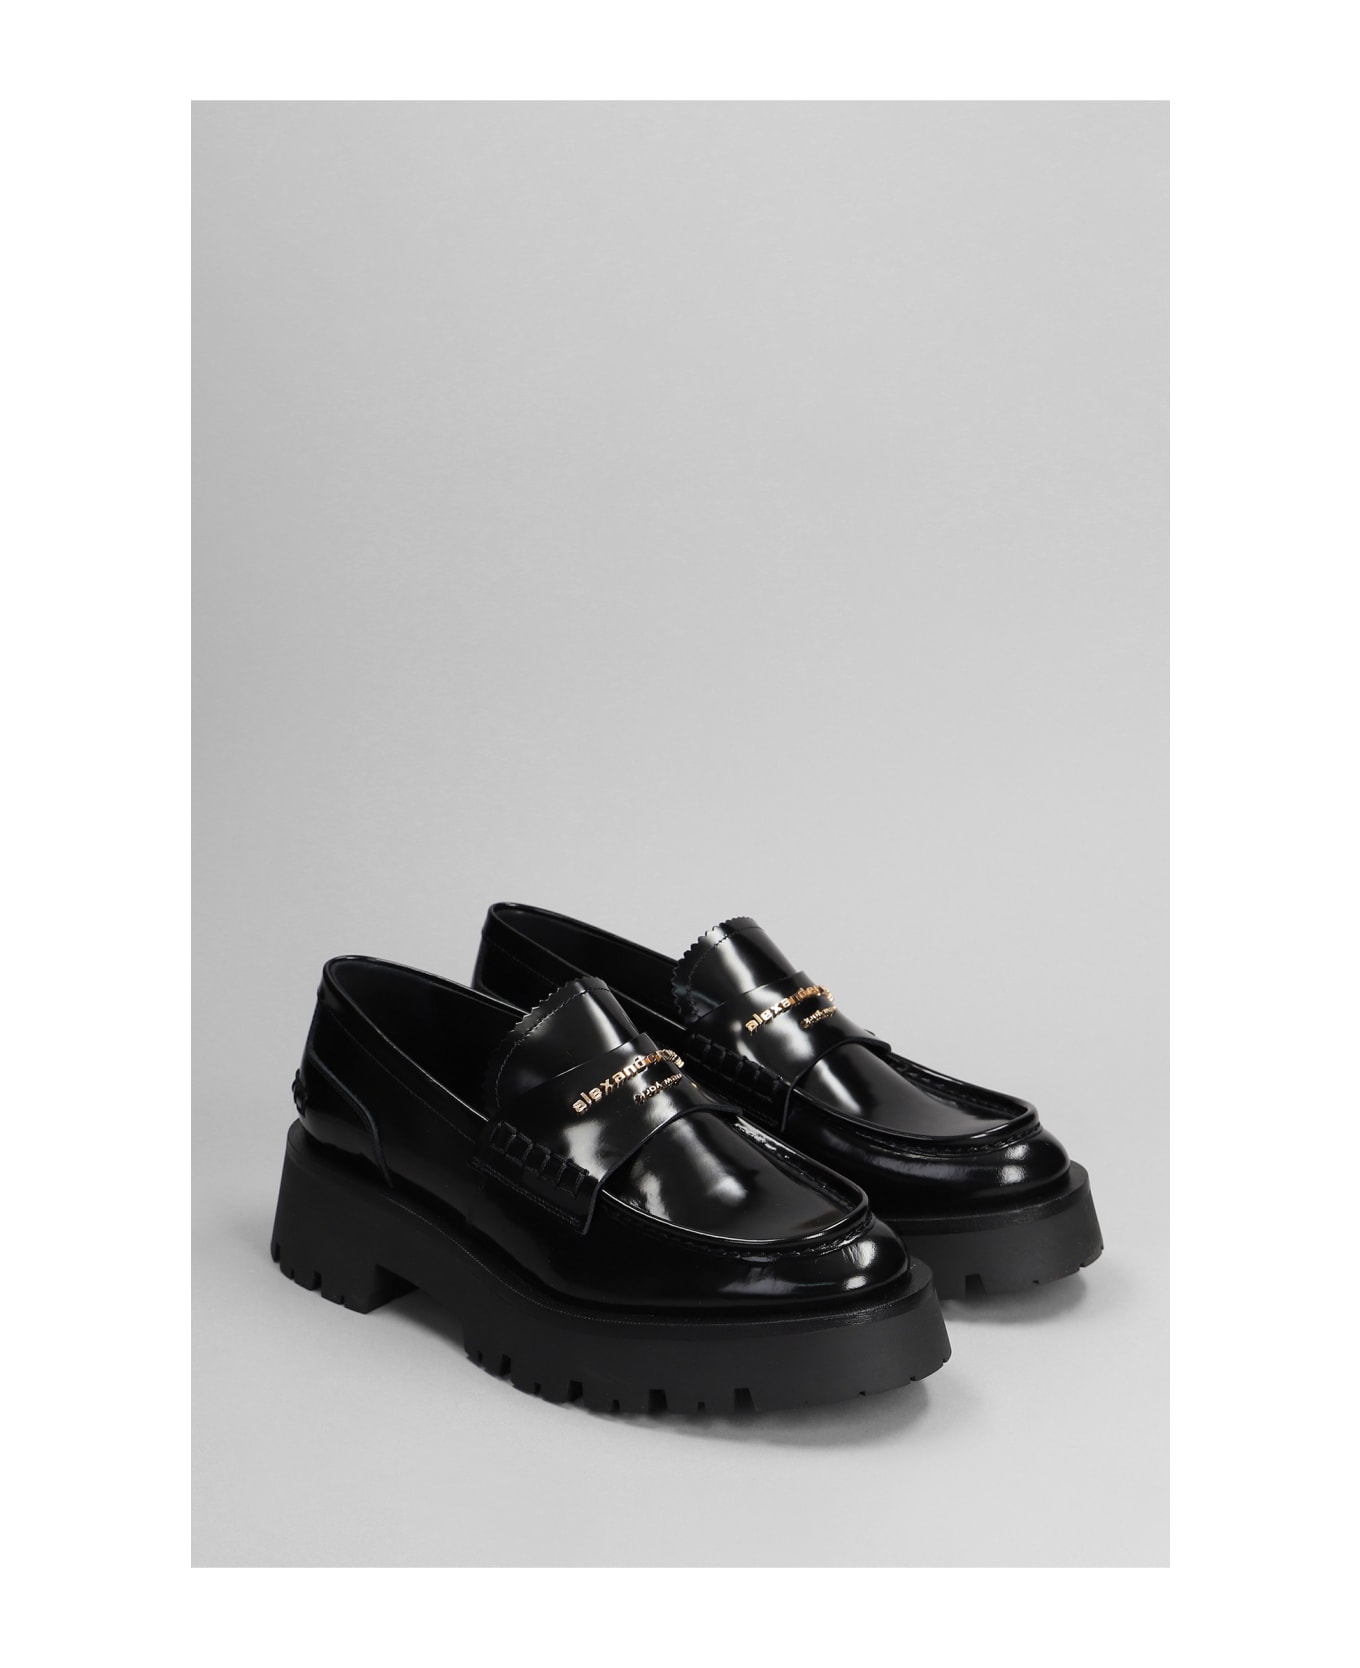 Alexander Wang Loafers In Black Leather - black